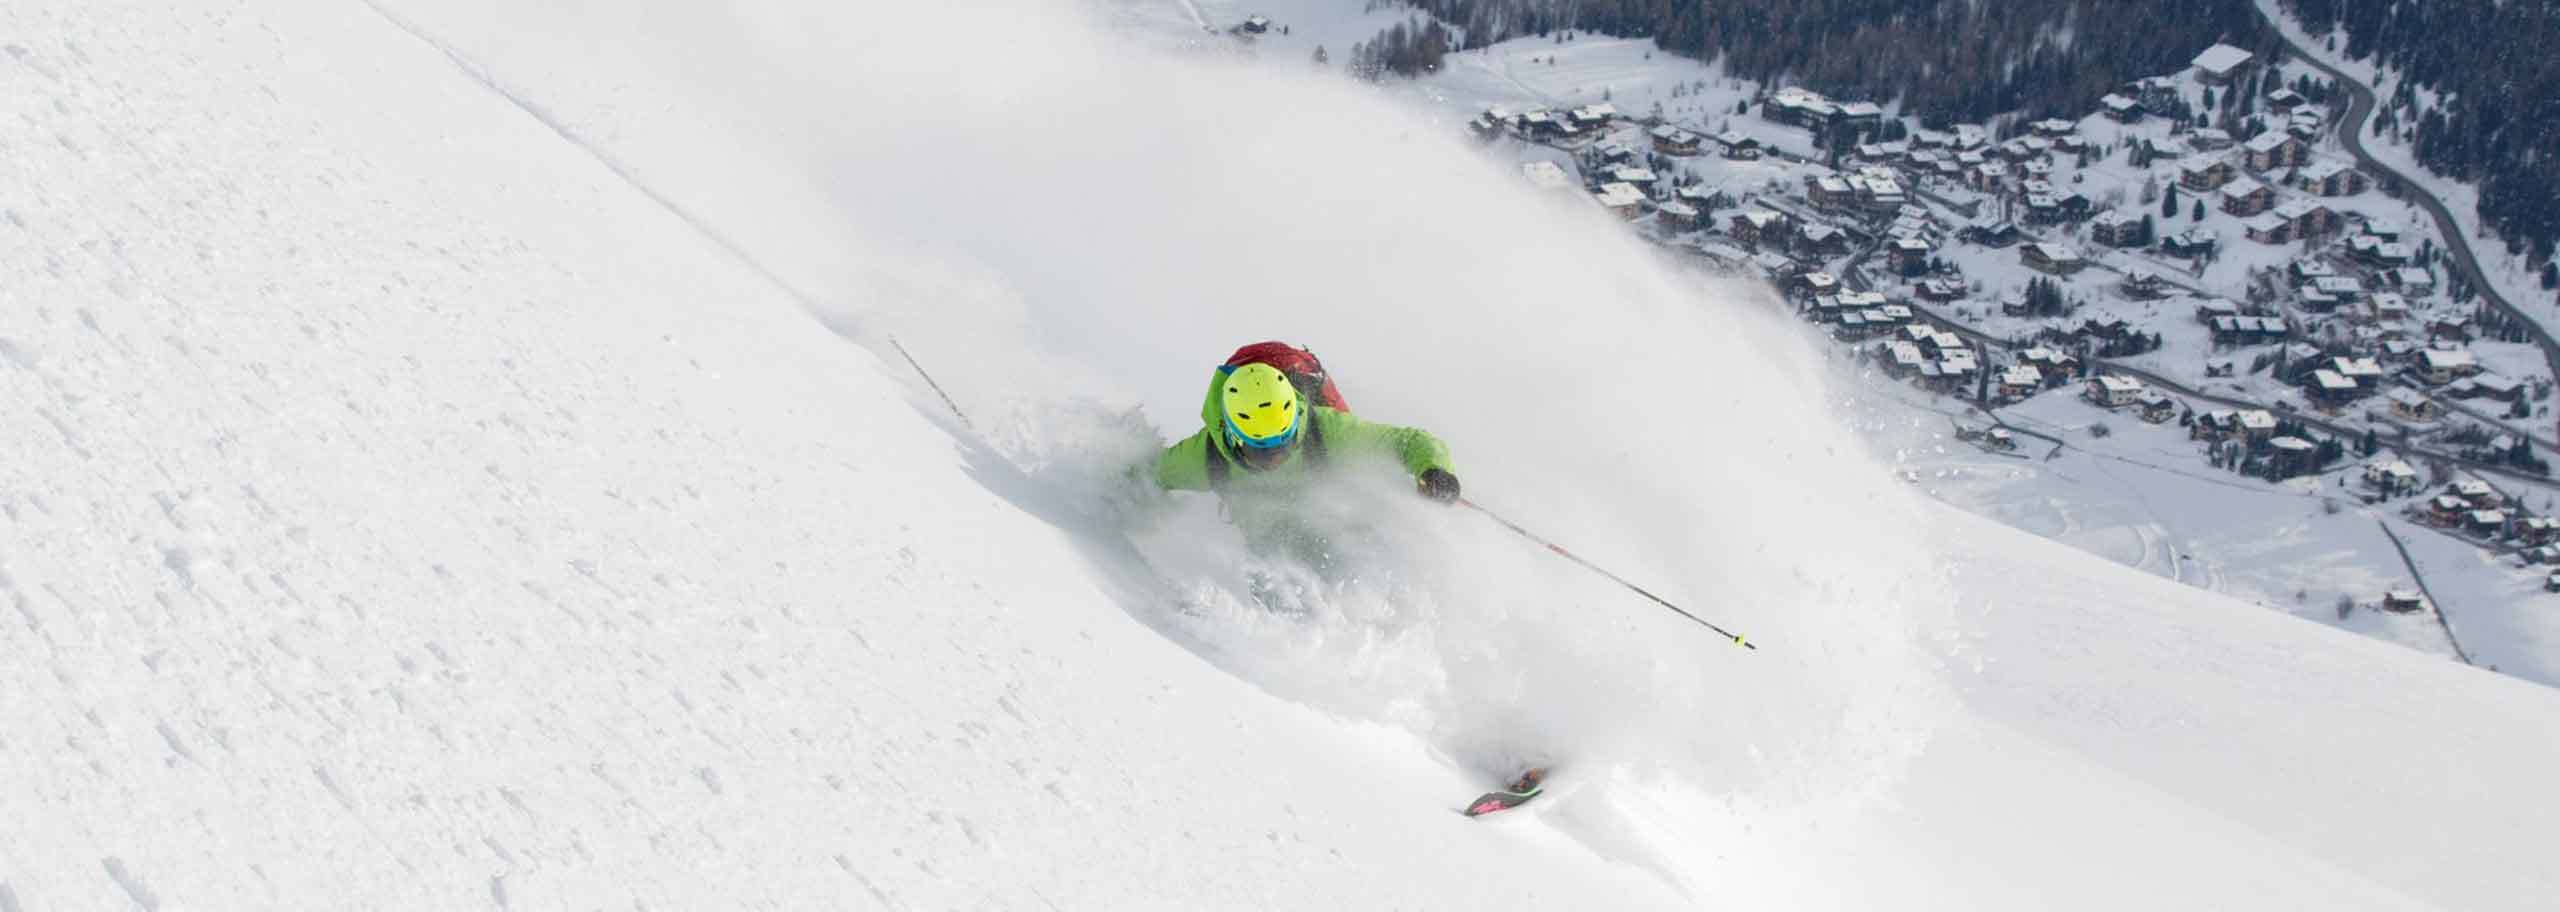 Off-piste Skiing in Livigno, Guided Freeride Skiing Experience